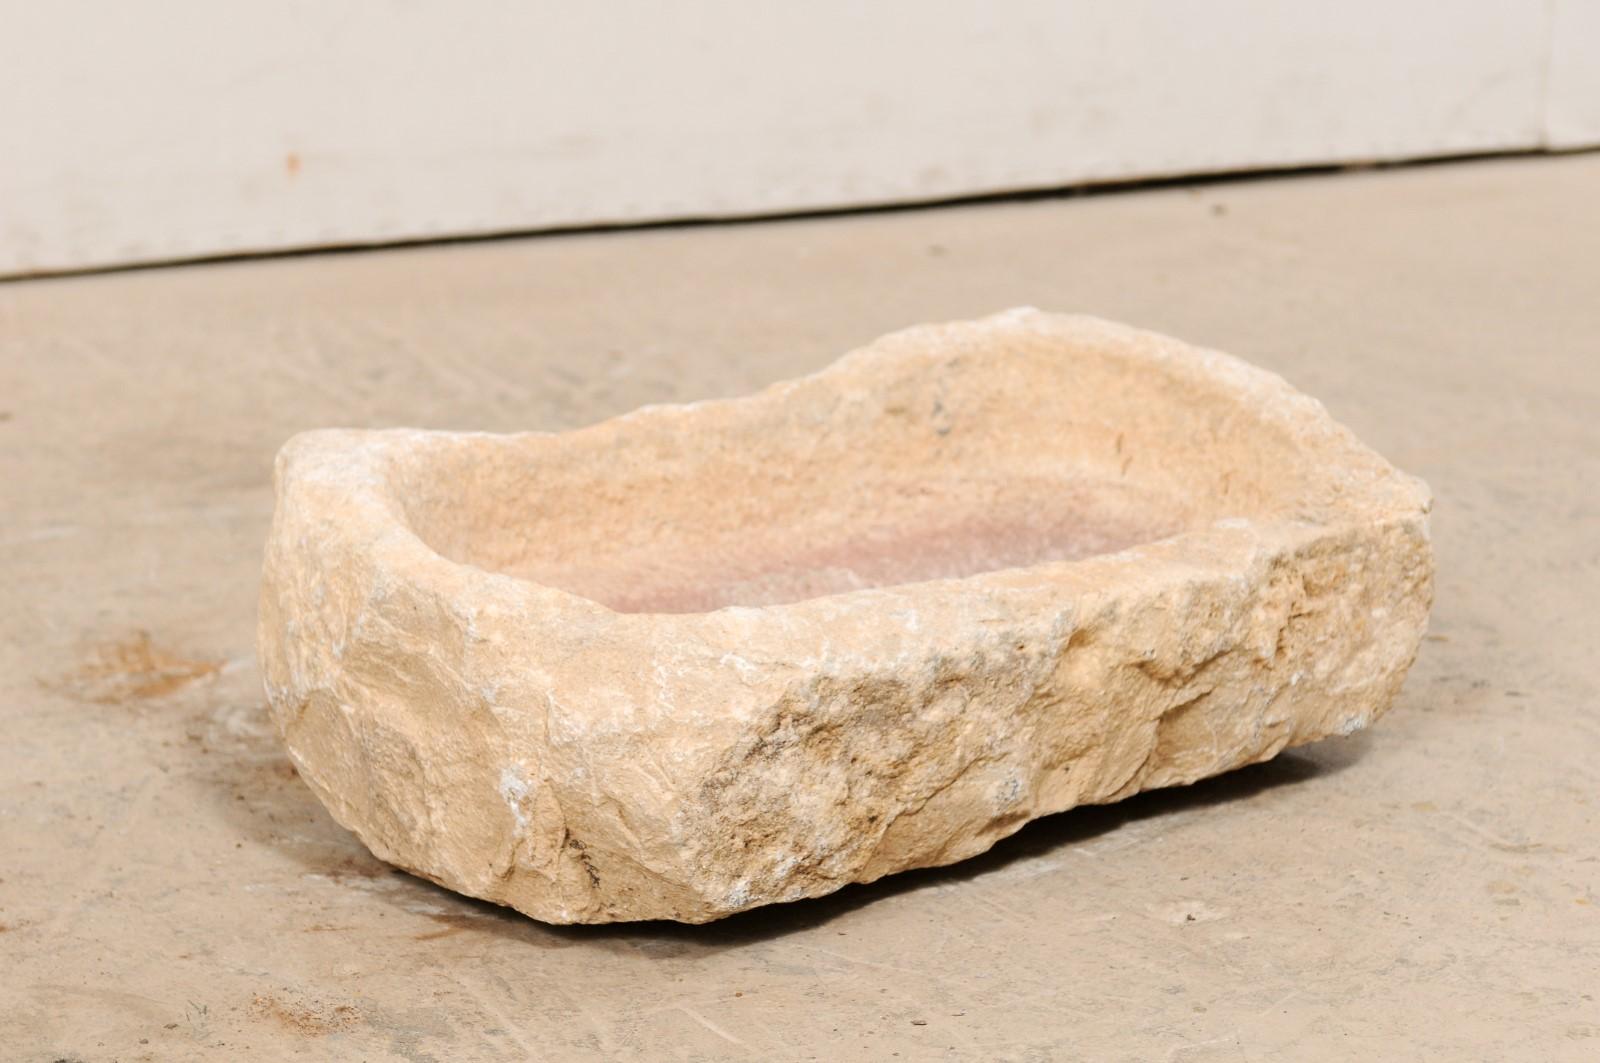 Spanish carved stone trough from the 19th century. This antique trough from Spain, with its oblong shape, has been hand carved out of a single piece of stone, having a nicely textured surface. In addition to standing alone as a decorative object, it